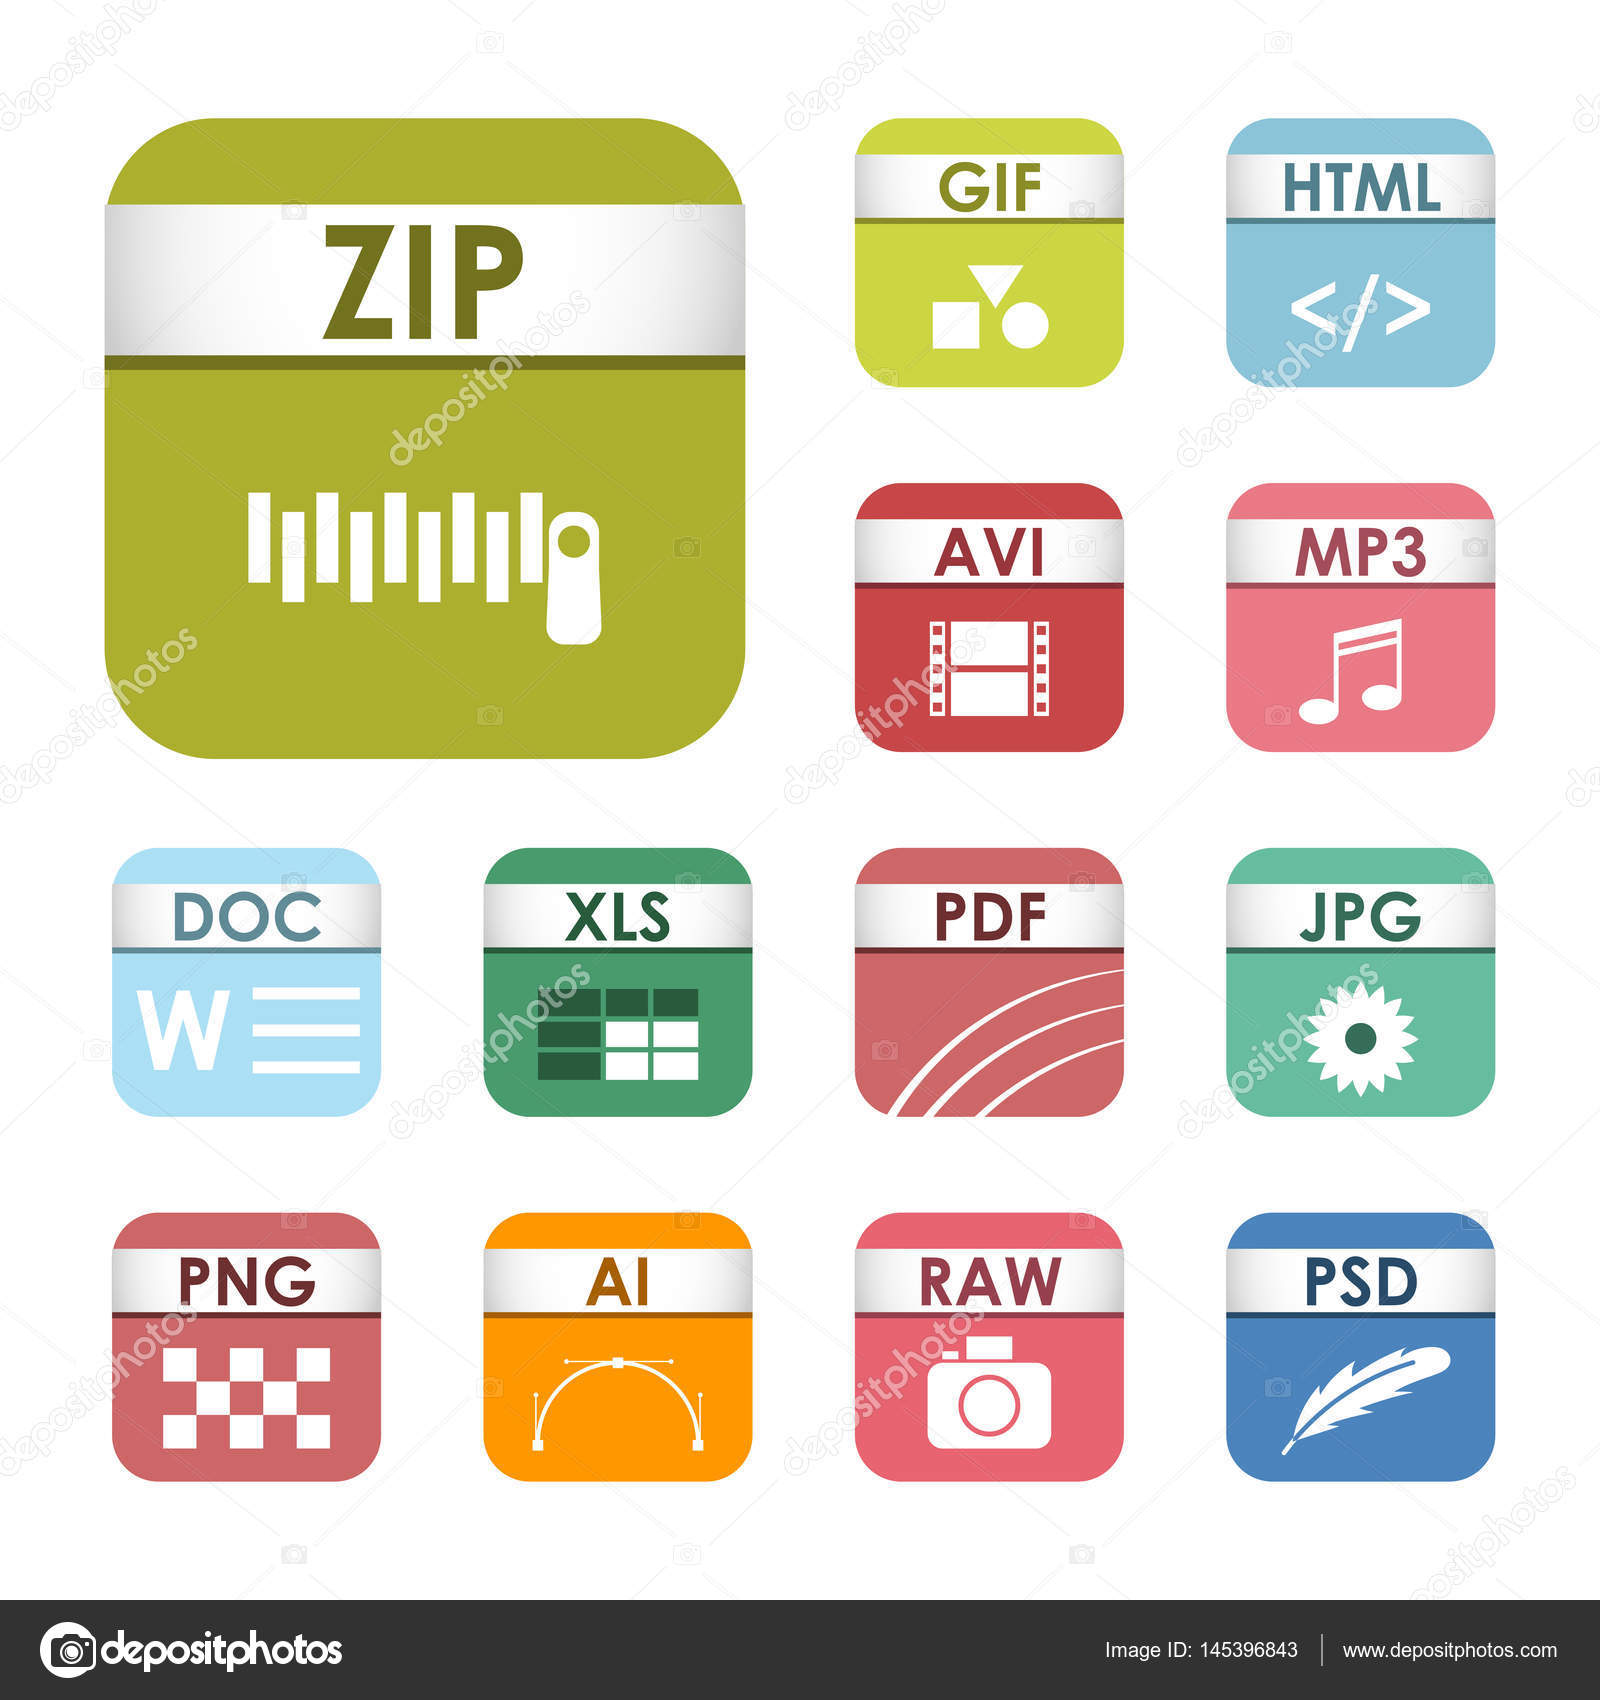 Gif, Extension, Files And Folders, document, File, Format, Archive icon